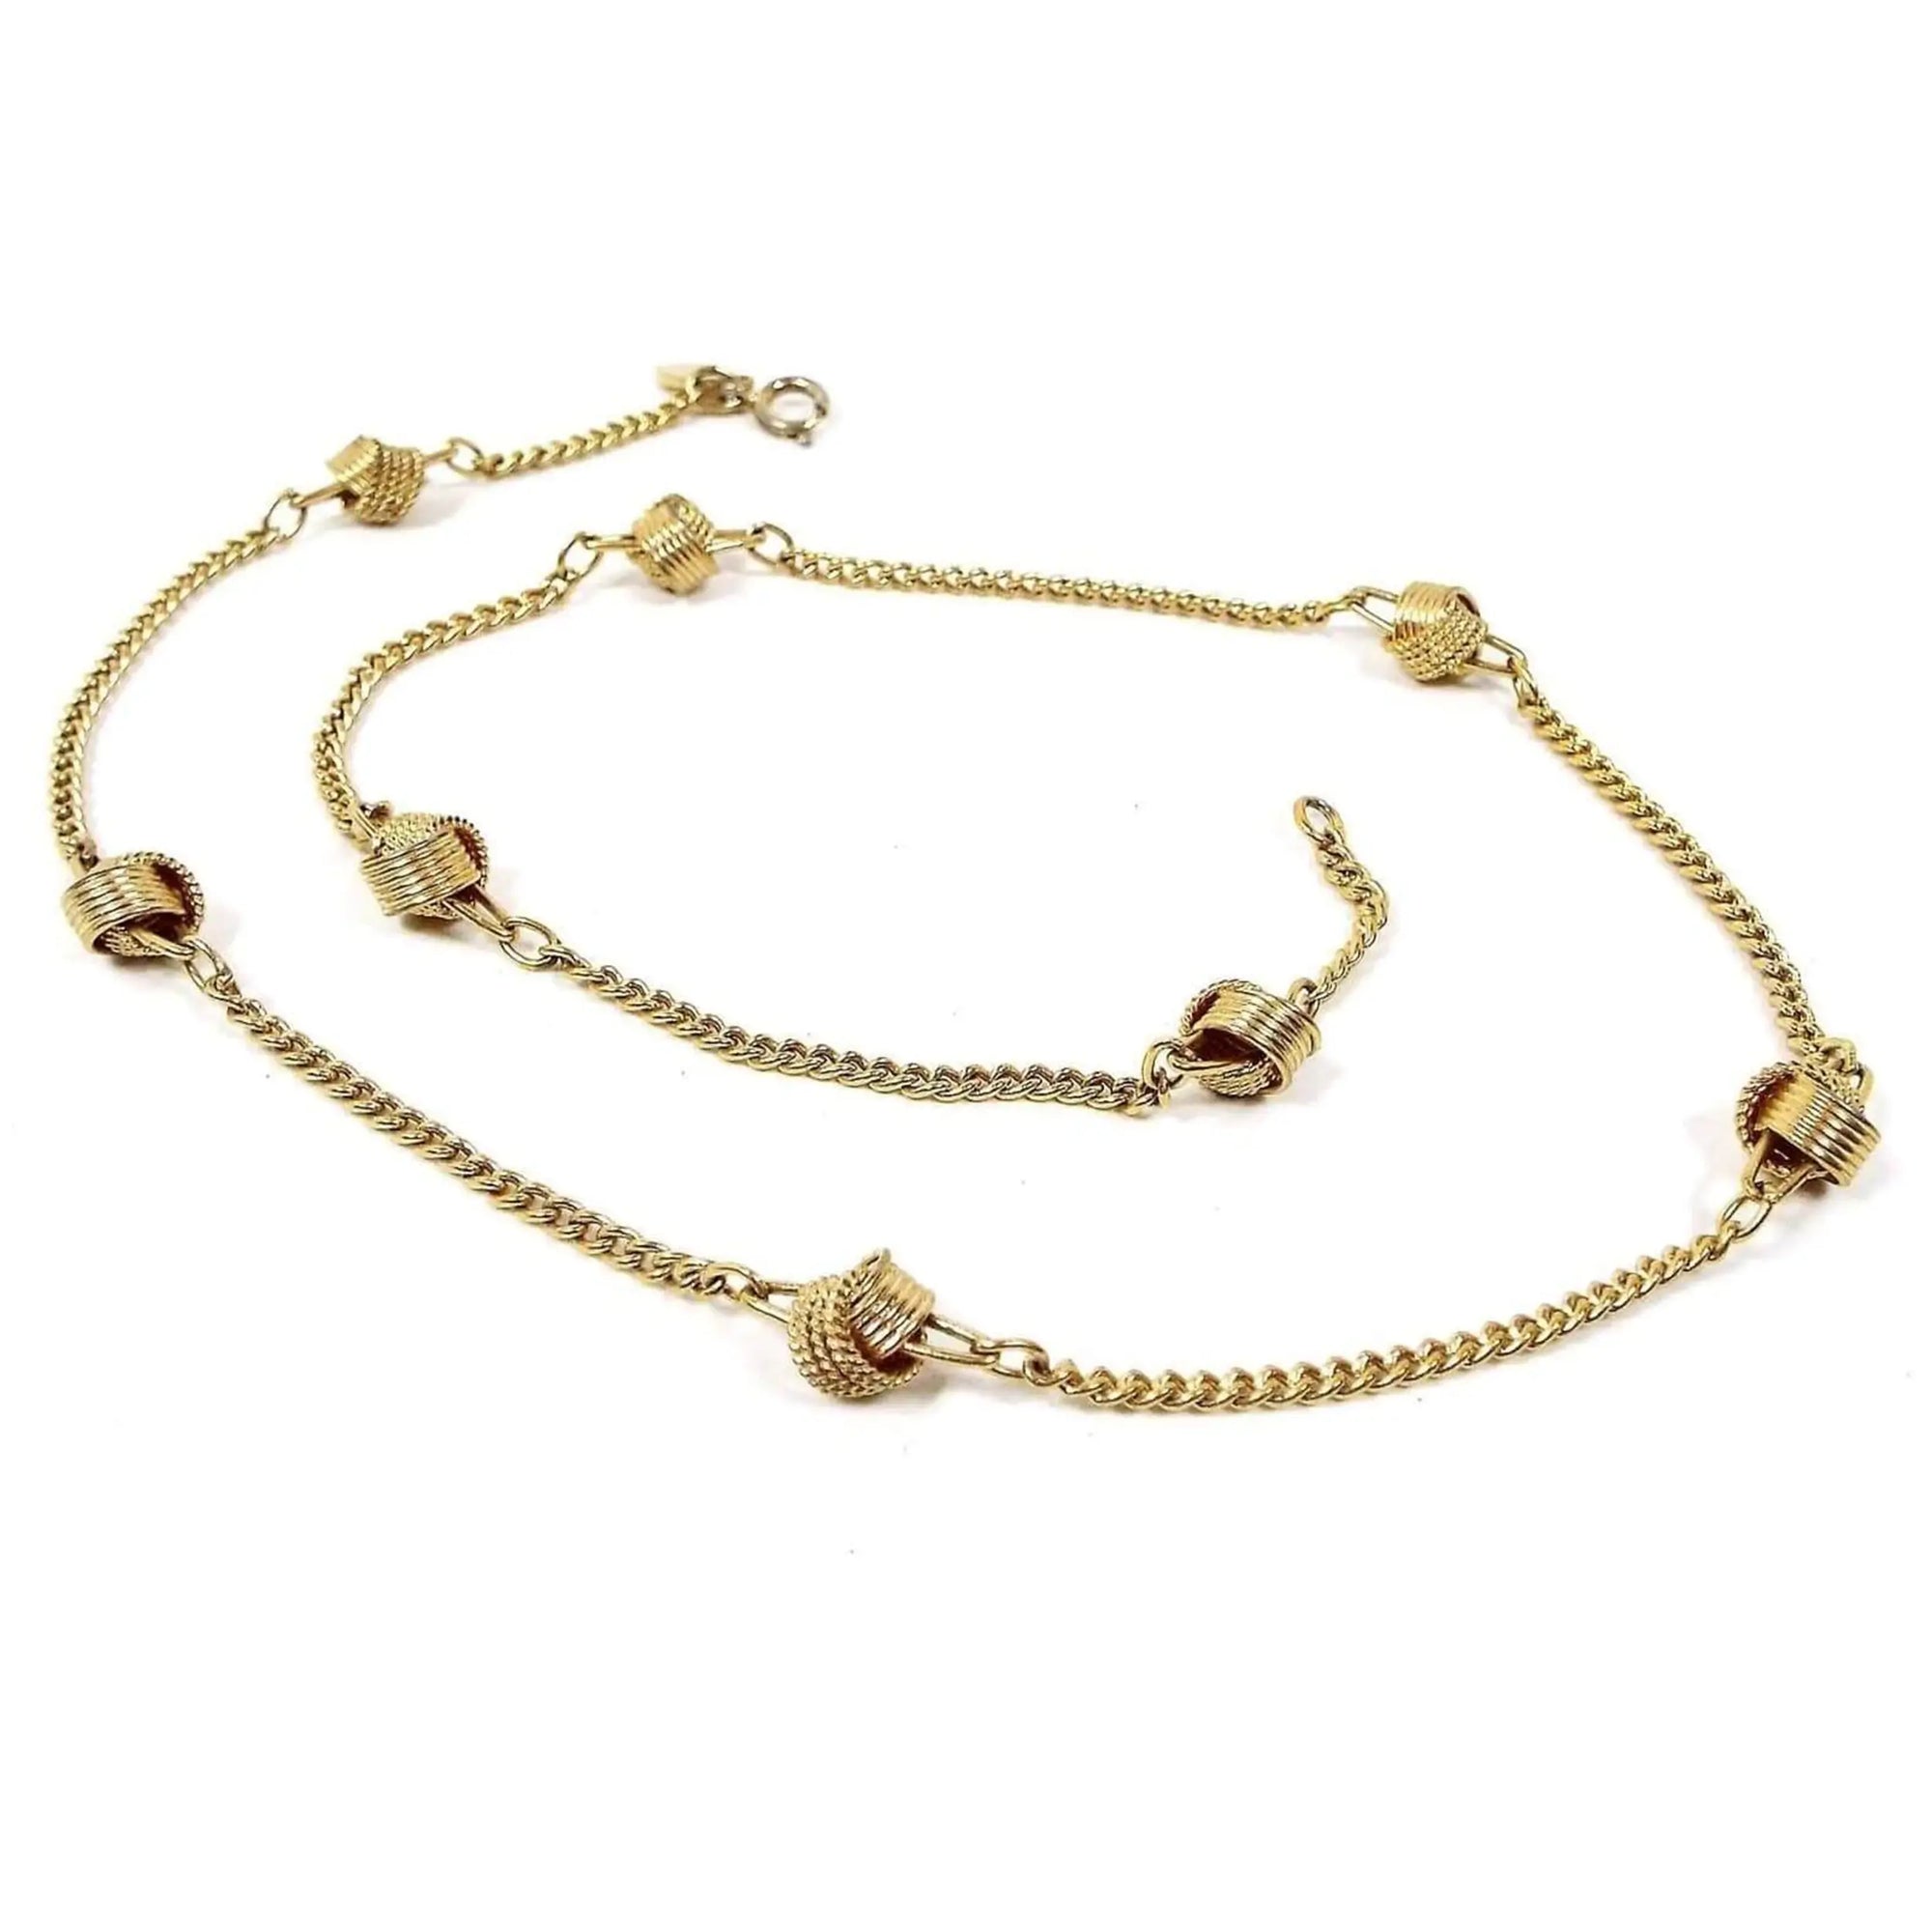 Top view of the retro vintage Avon knot chain necklace. It has a thinner style curb link chain with a round spring ring clasp at the end. There are spaced round textured open rings that are joined together to form the knot areas spaced out on the chain. There are 8 knot areas. The entire necklace is gold tone in color. 